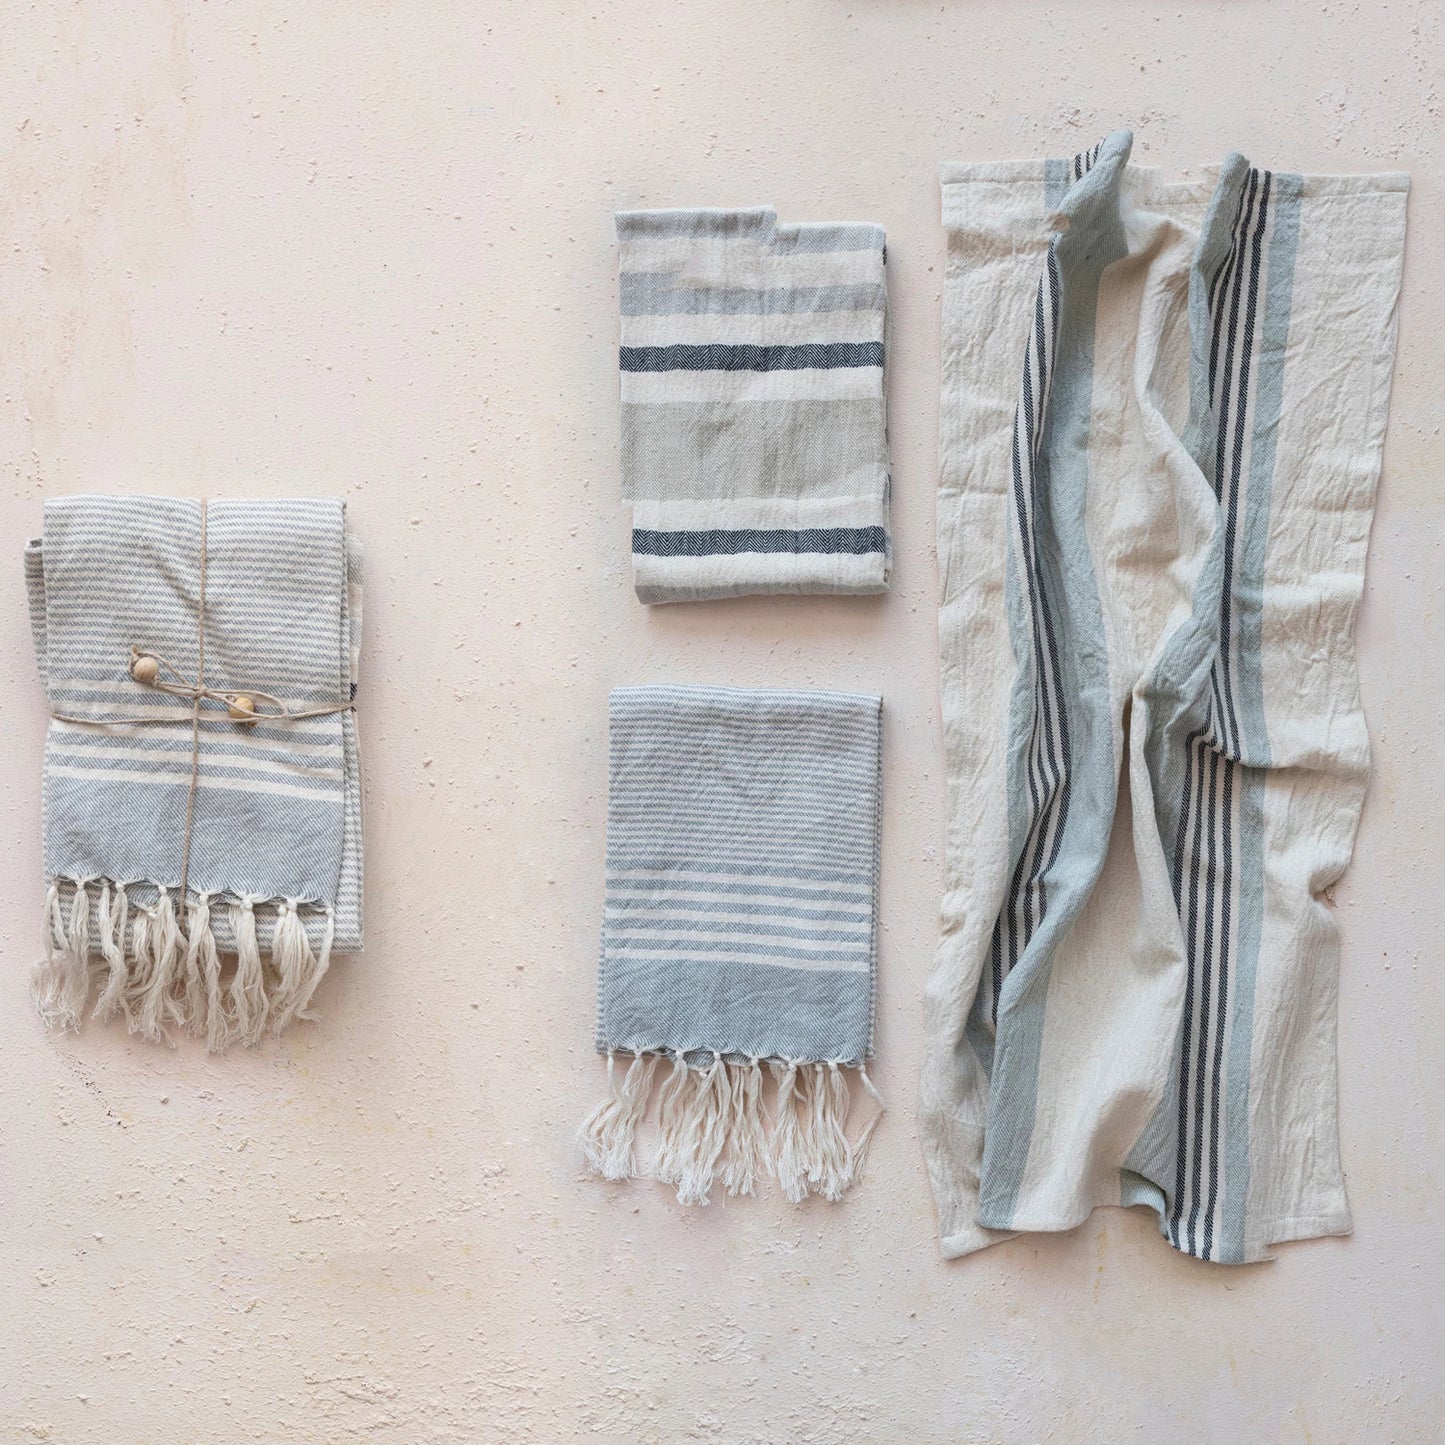 woven cotton tea towels with stripes displayed folded and stacked then open next to the stacked pile on a cream background